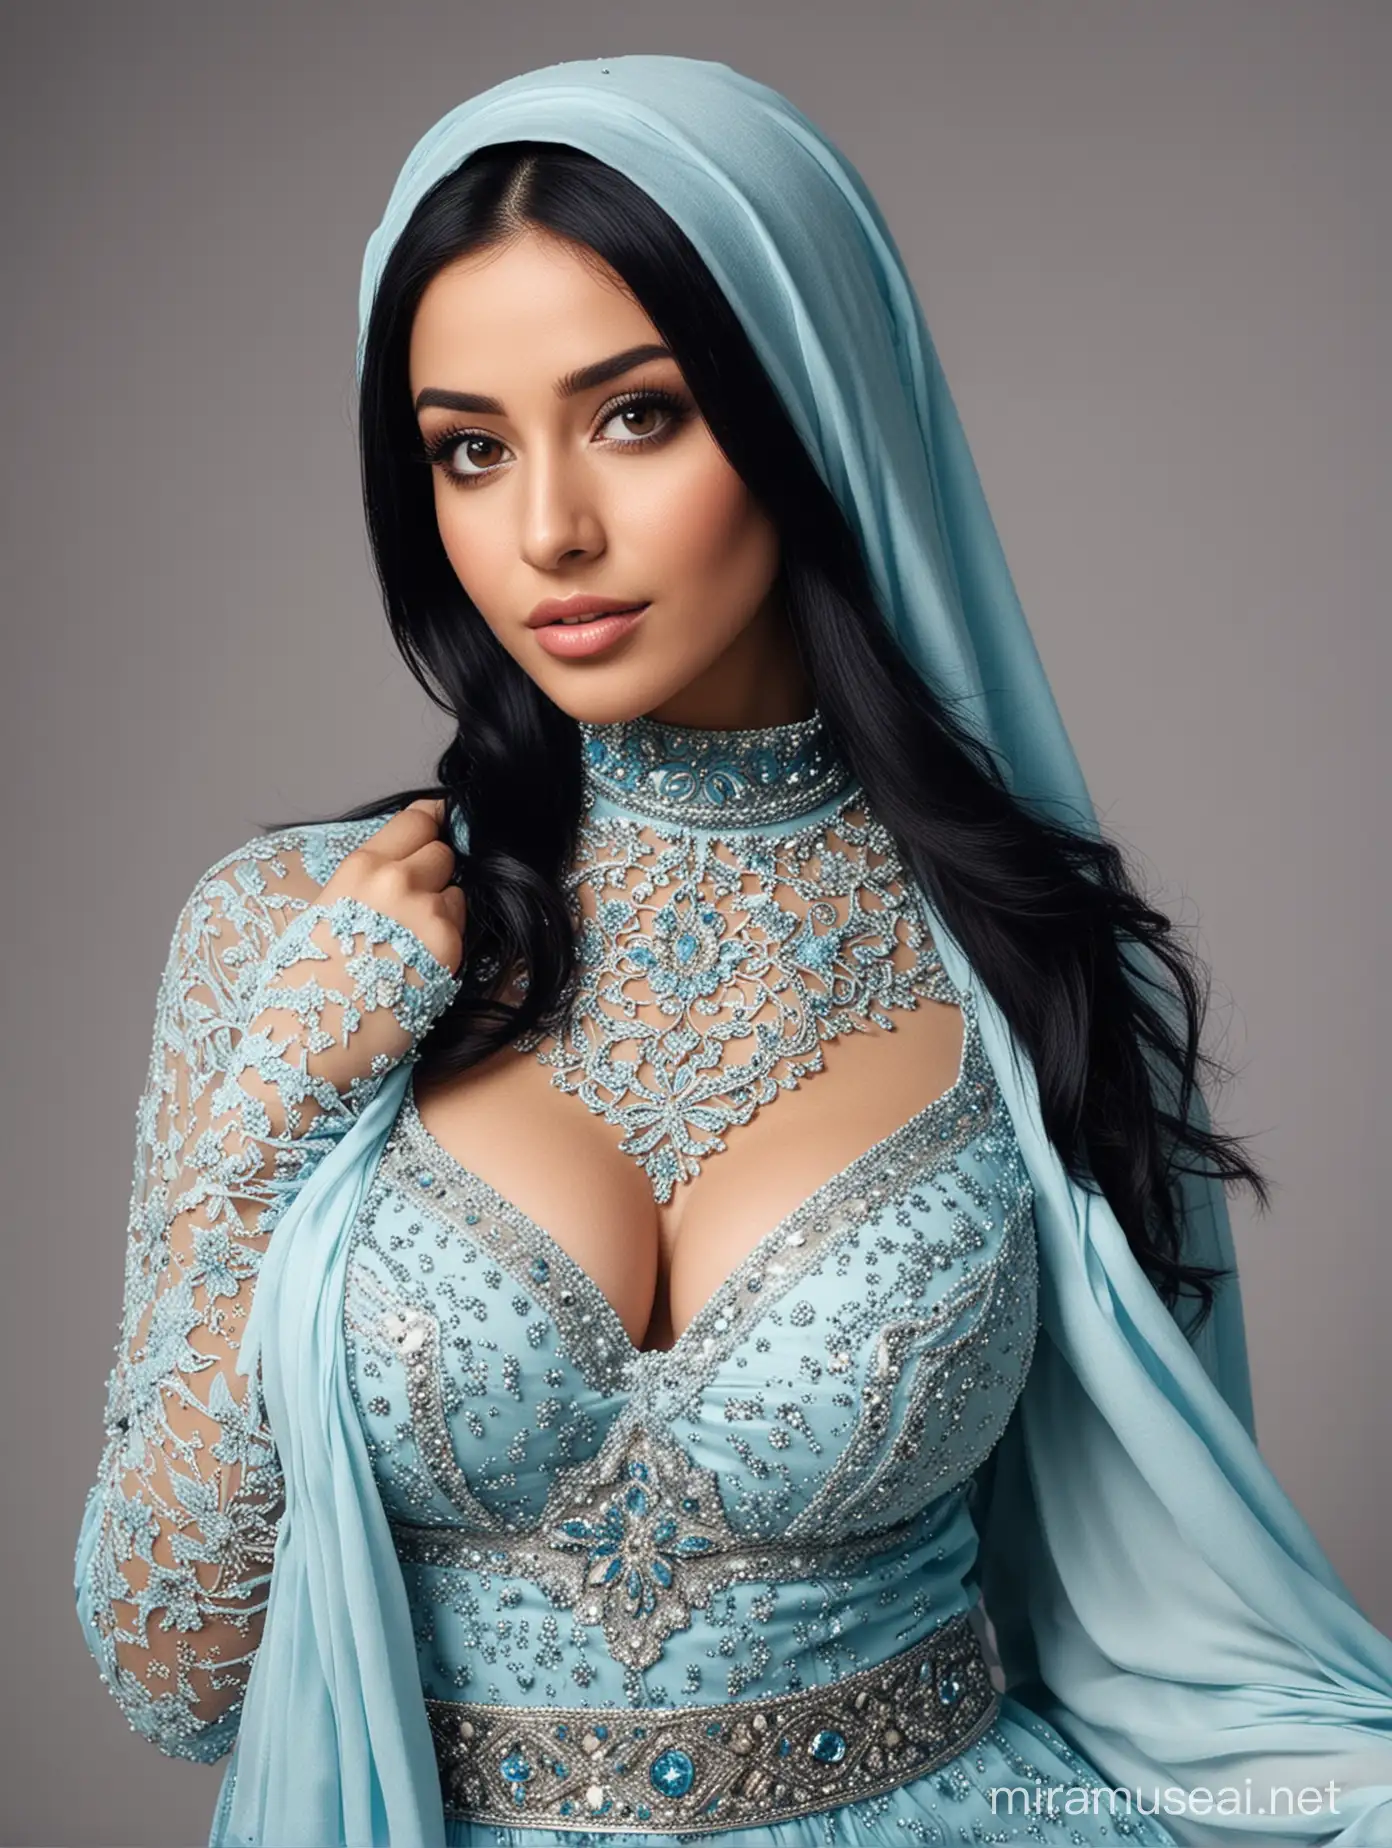 Photo of beautiful girl with hijab. A native of Dubai. With long black hair. Very large breasts. The dress is so blue and sexy. very fit